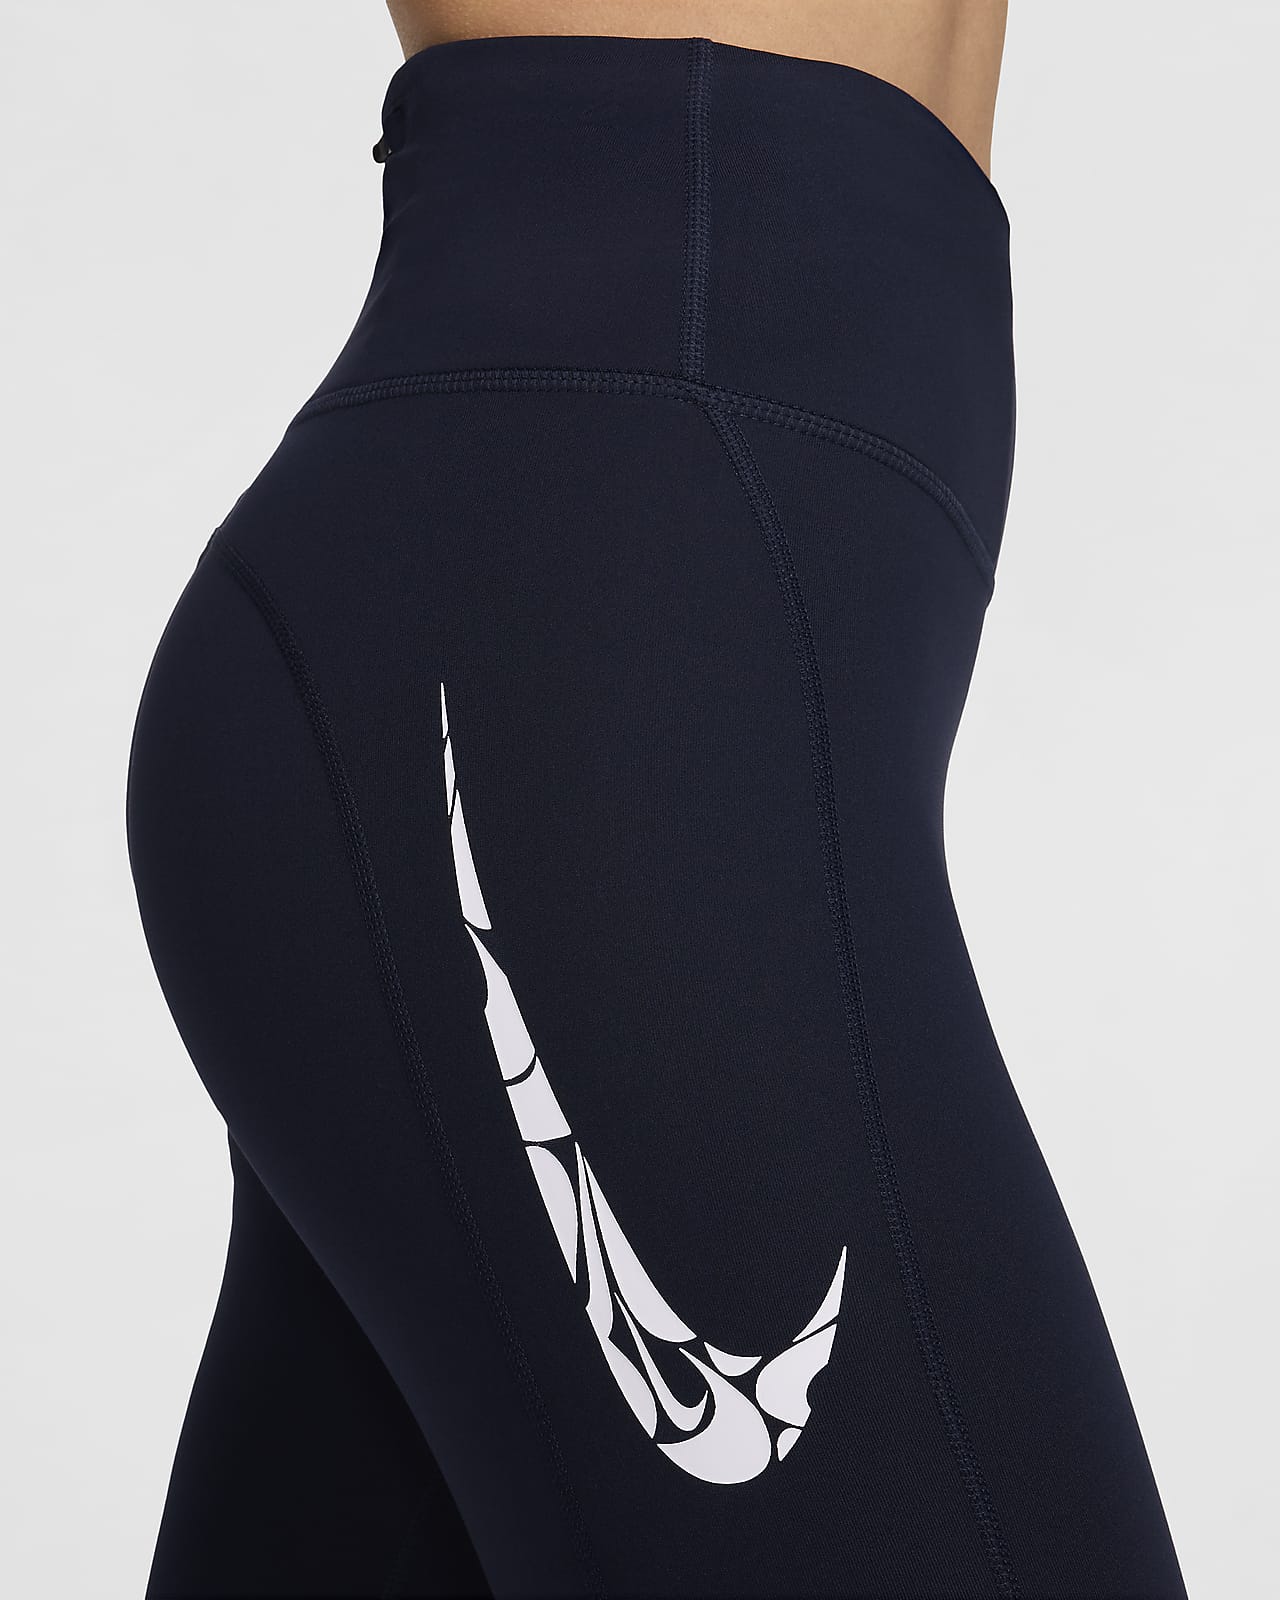 Nike Fast Women's Mid-Rise 7/8 Running Leggings with Pockets (Plus Size)